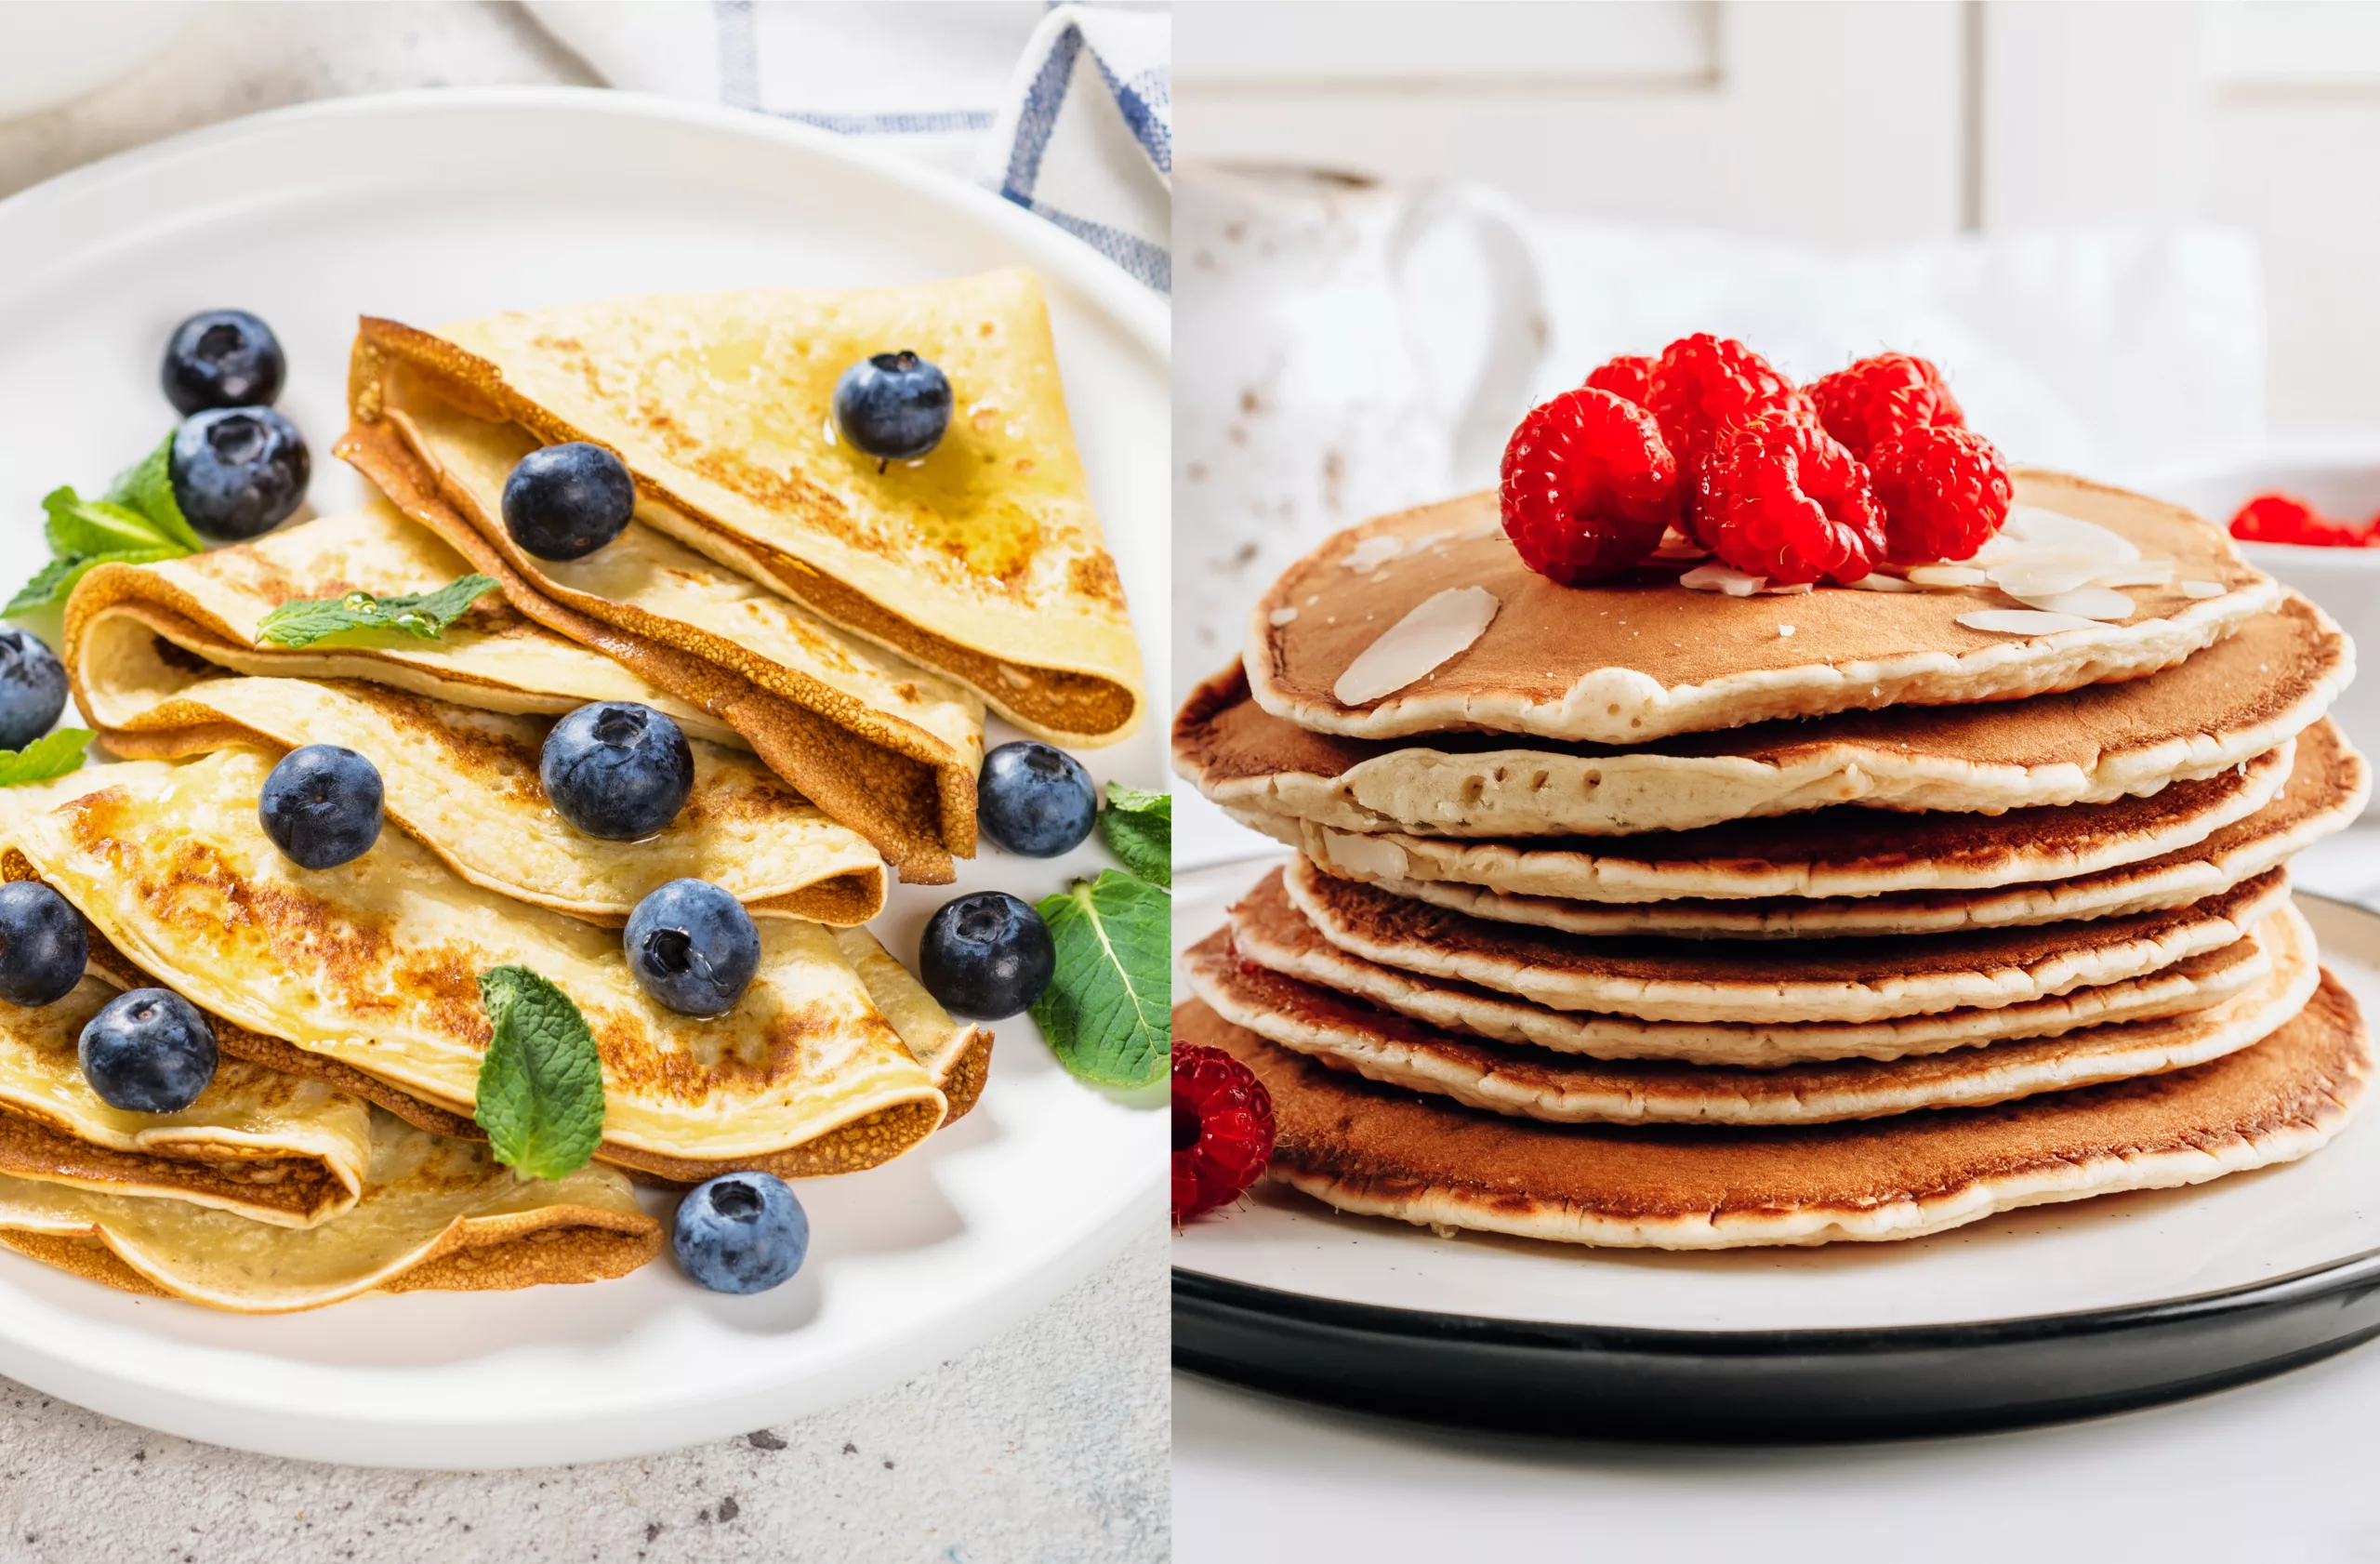 German Eierkuchen vs. American Pancakes - we baked both to see which we like better!